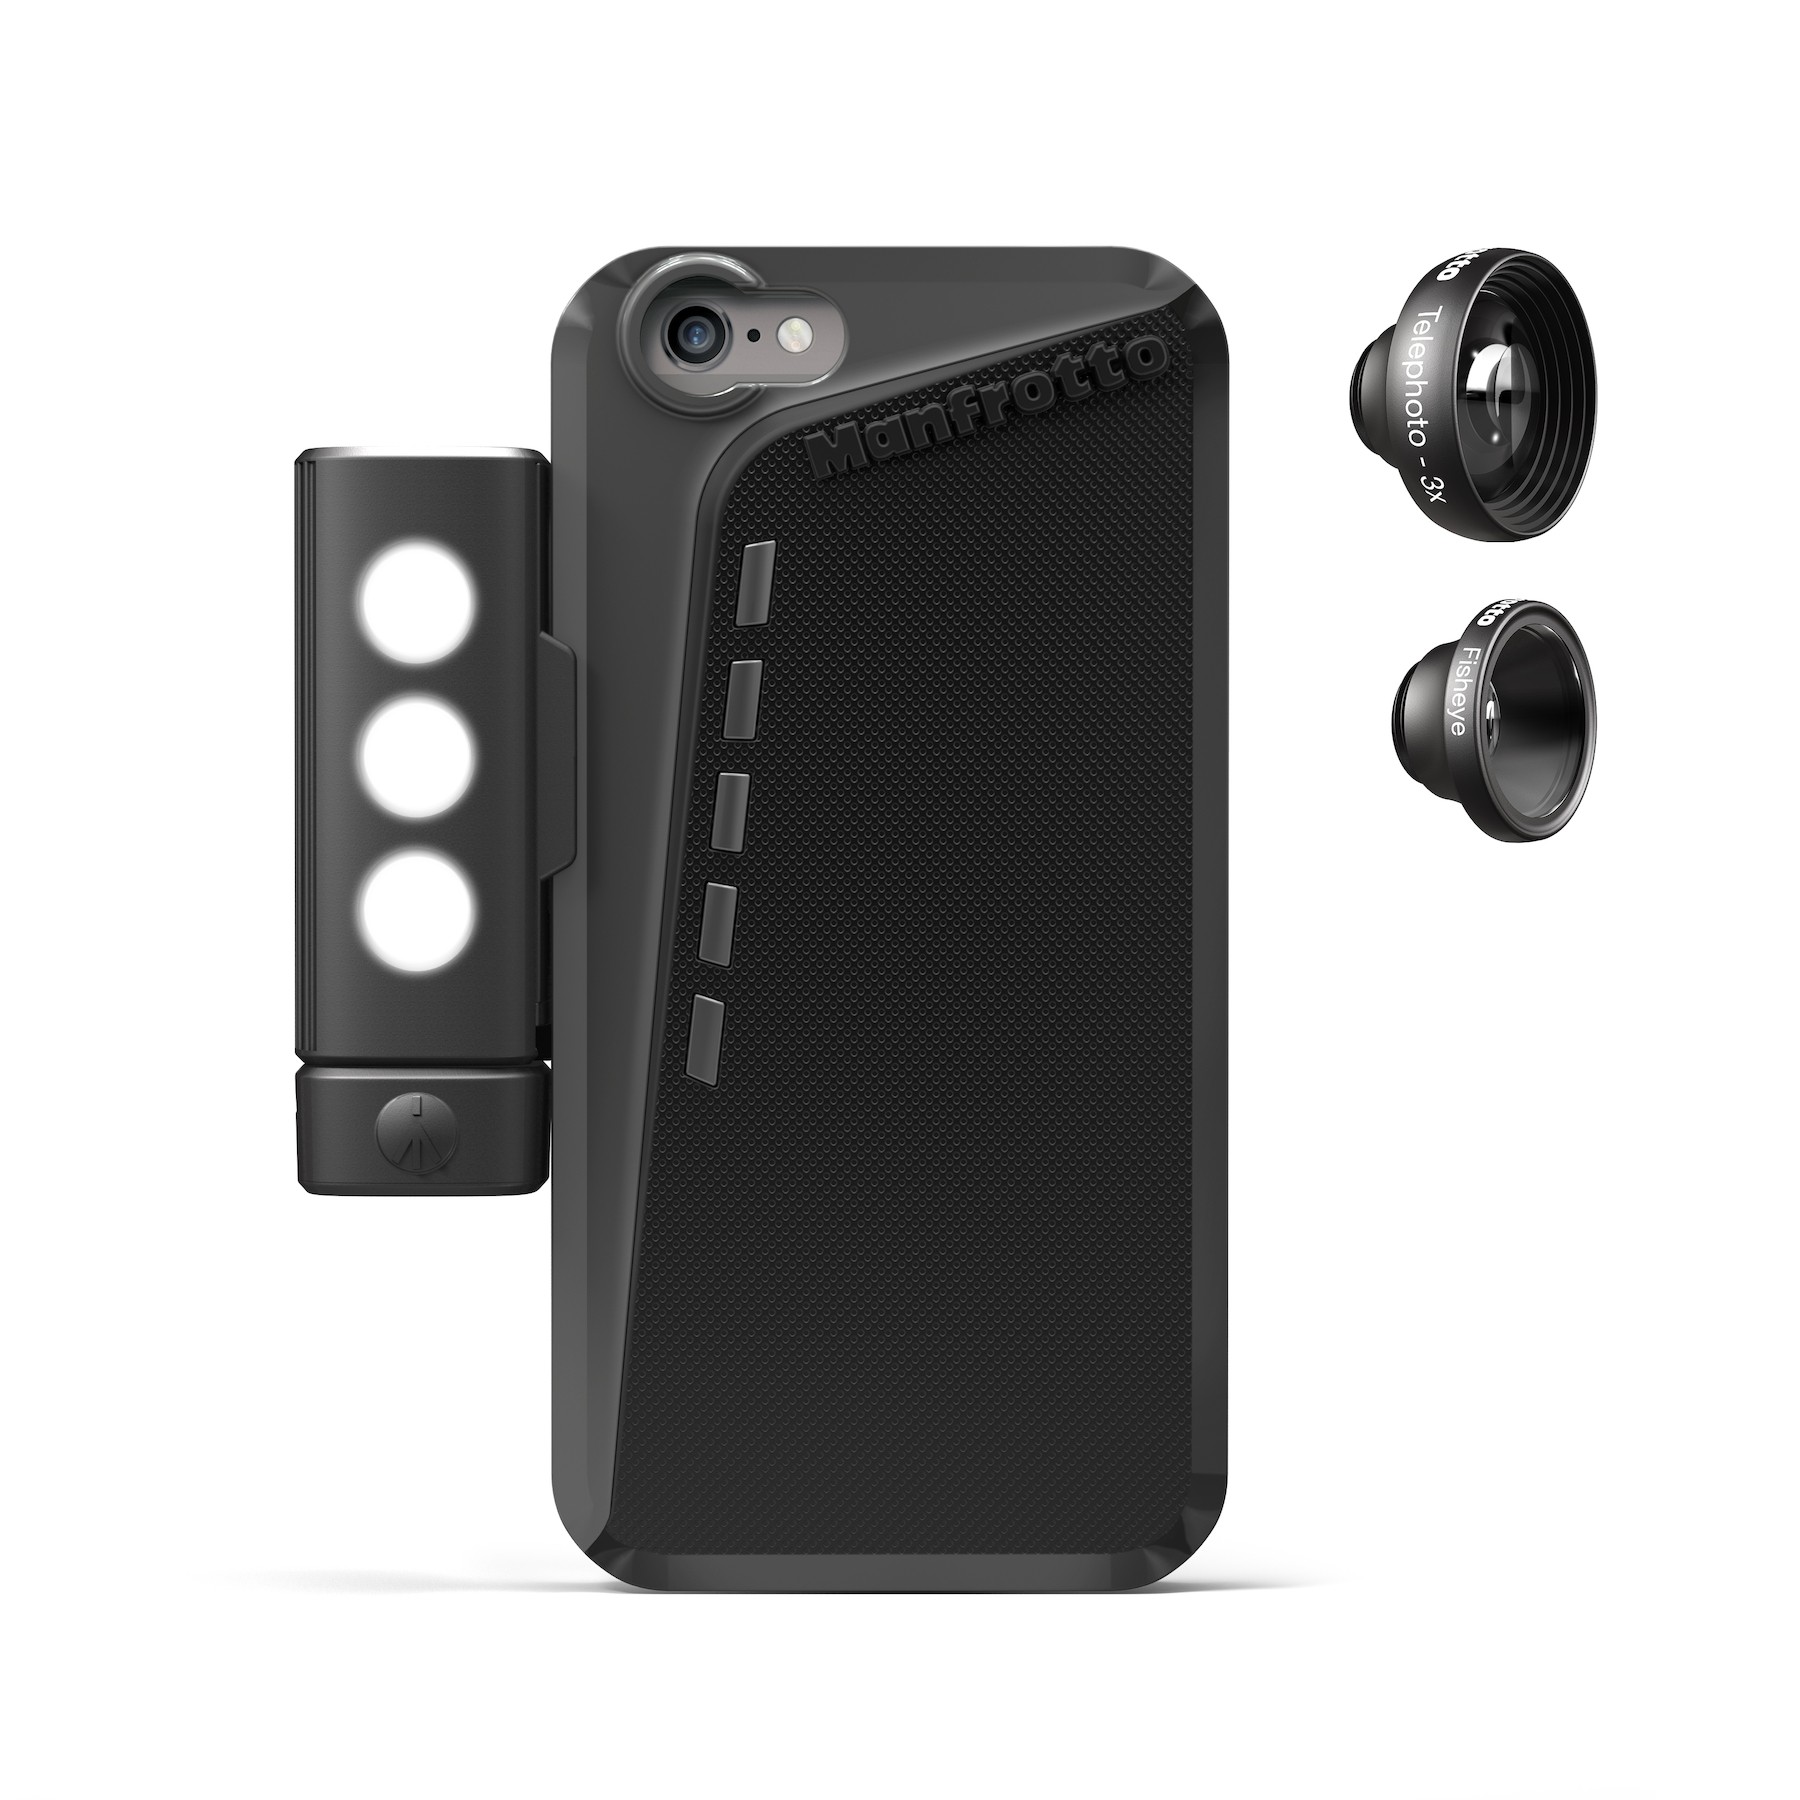 Image of Manfrotto Klyp Complete Kit iPhone 6